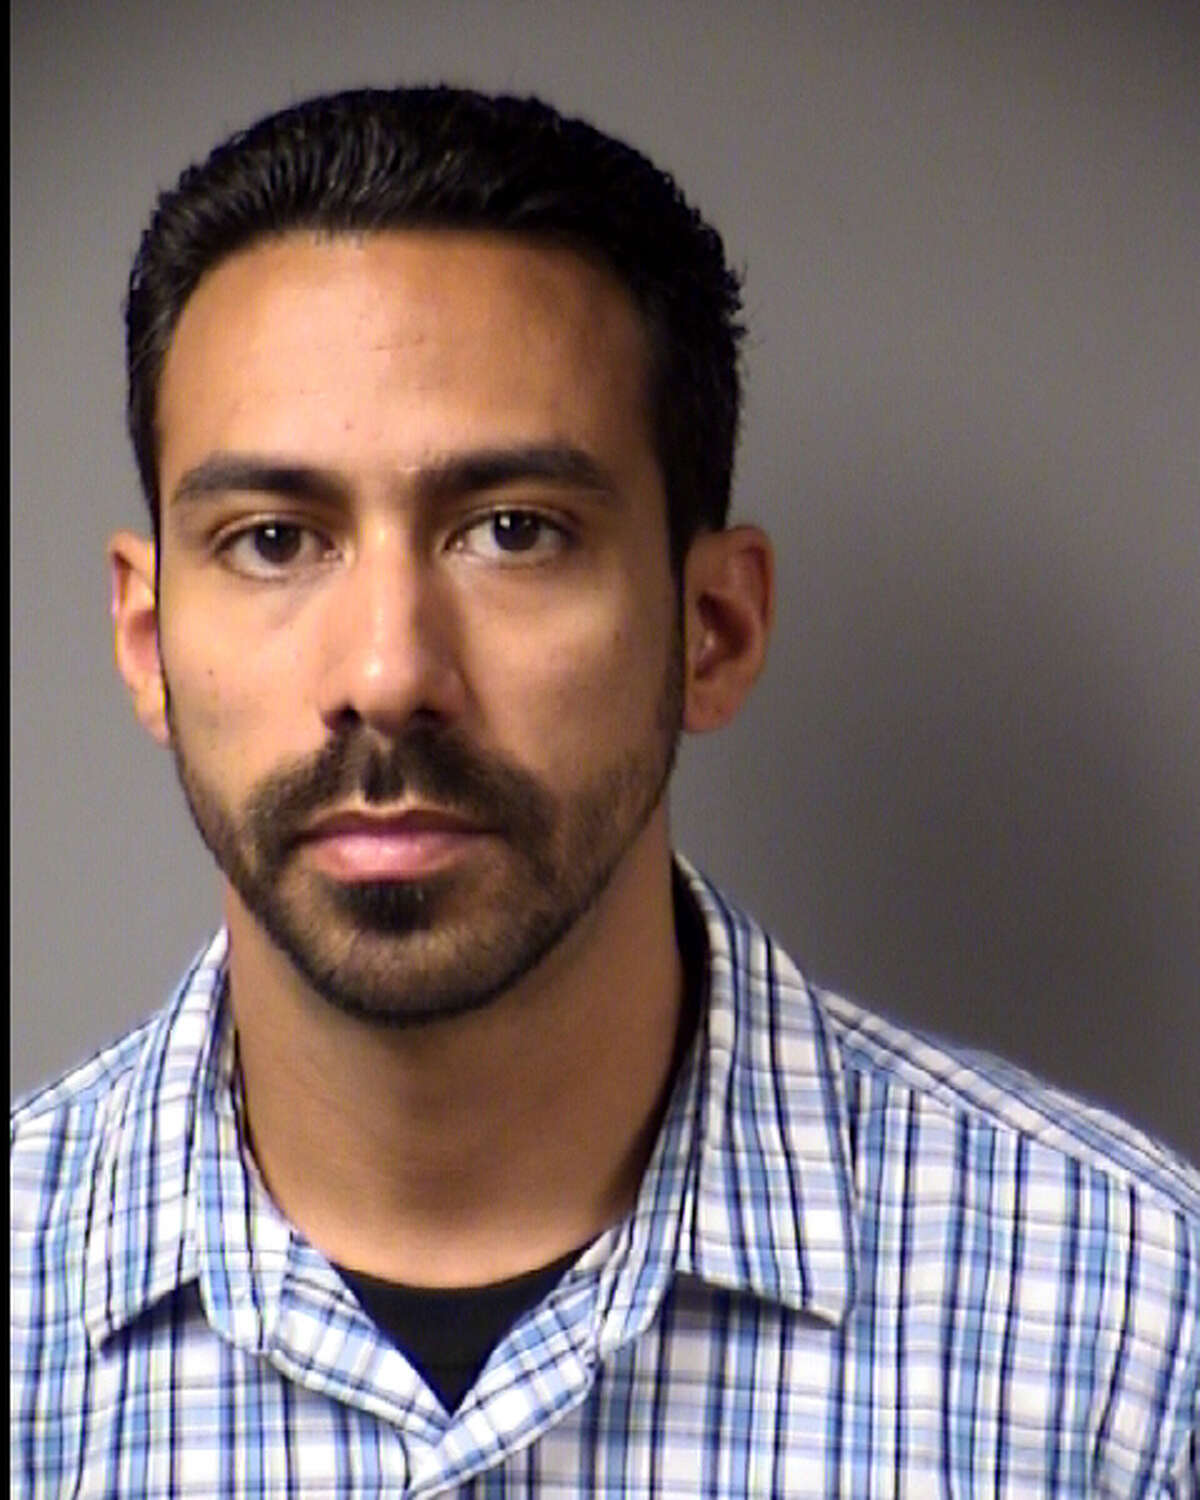 Jose Rivera is suspected of shooting at an off-duty officer on the North Side Tuesday night.